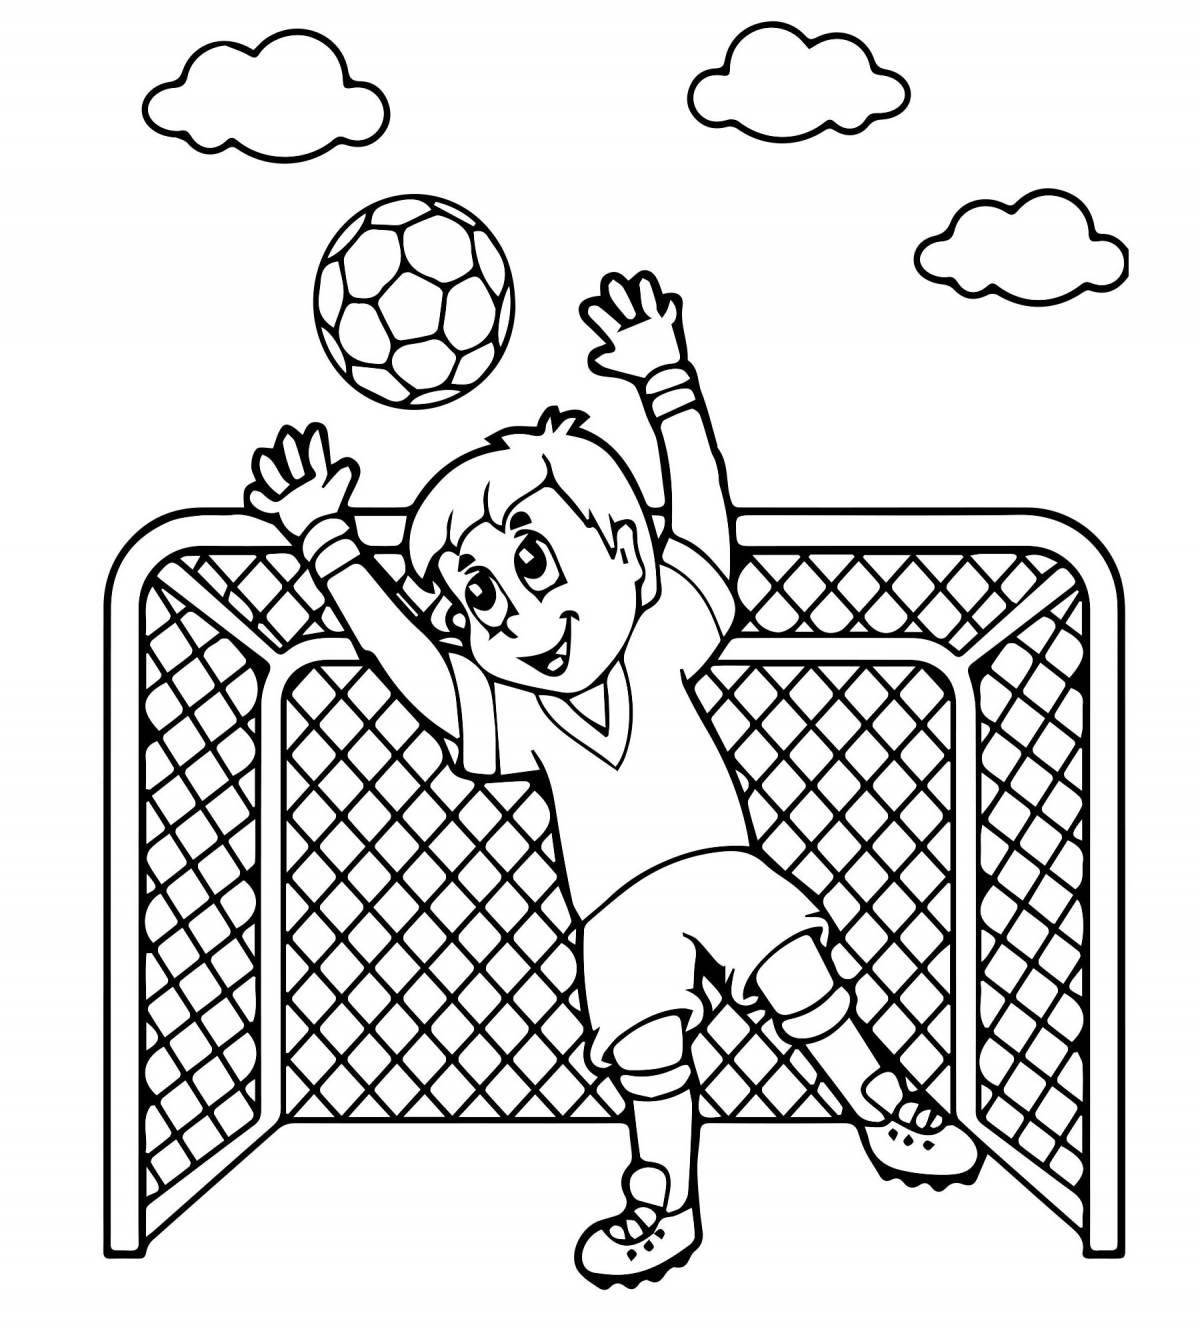 Coloring page dazzling goalkeeper